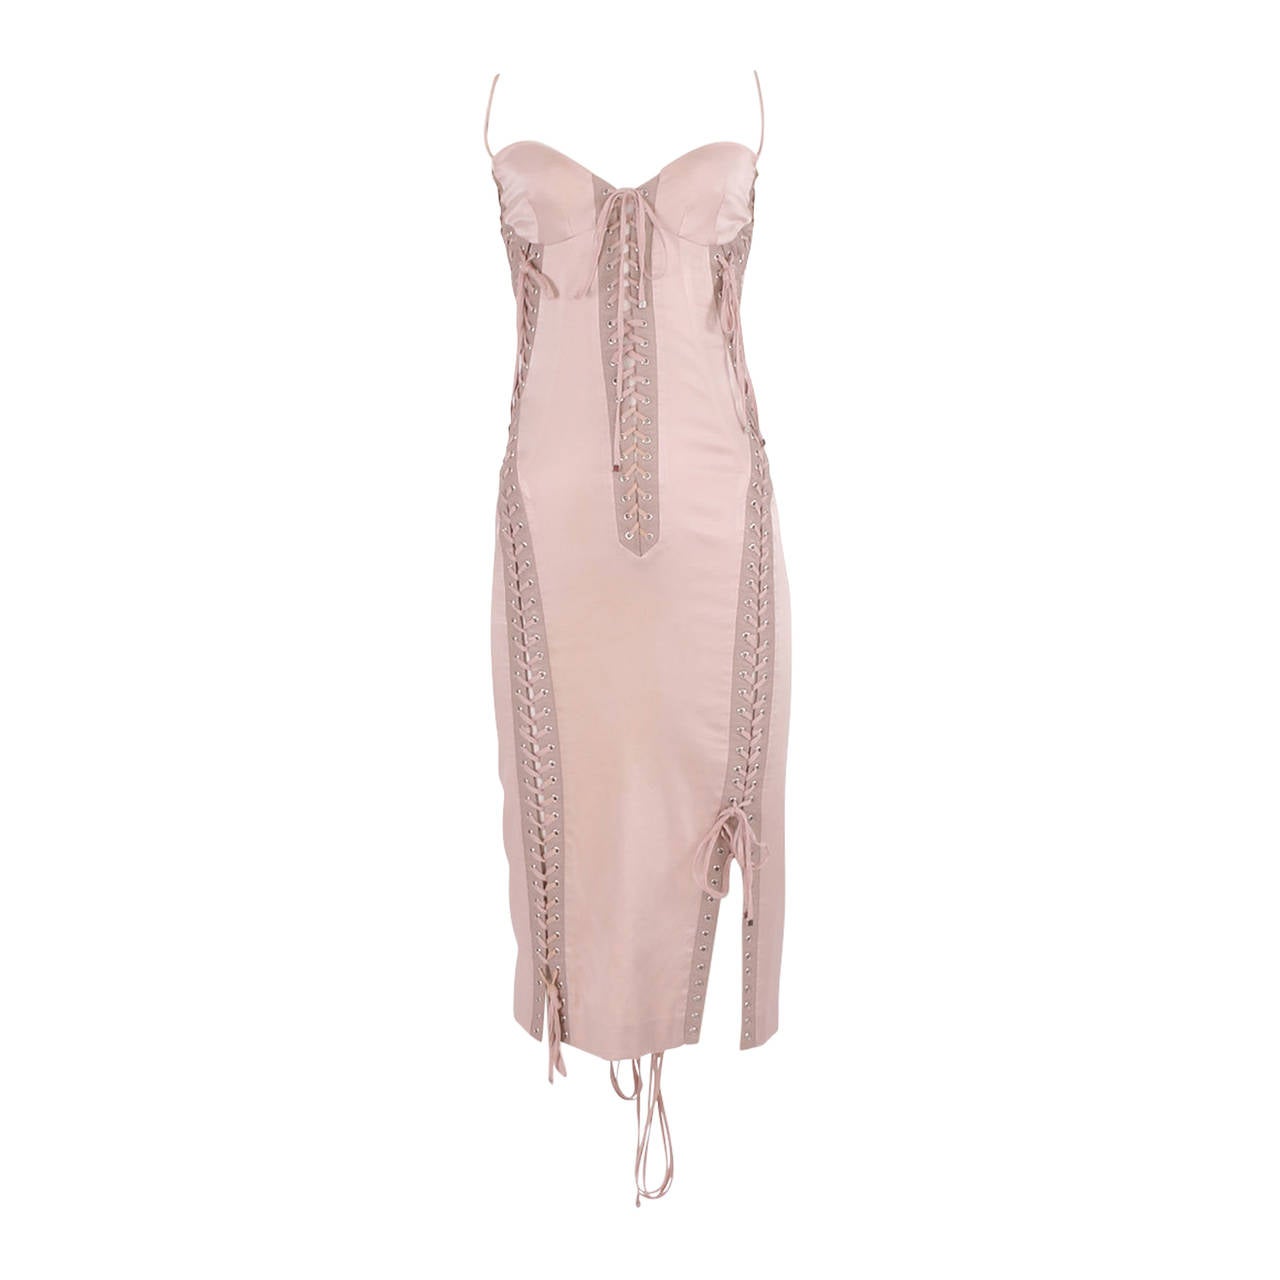 Dolce and Gabbana S/S 2003 Powder Pink Lace Up Dress - size S For Sale